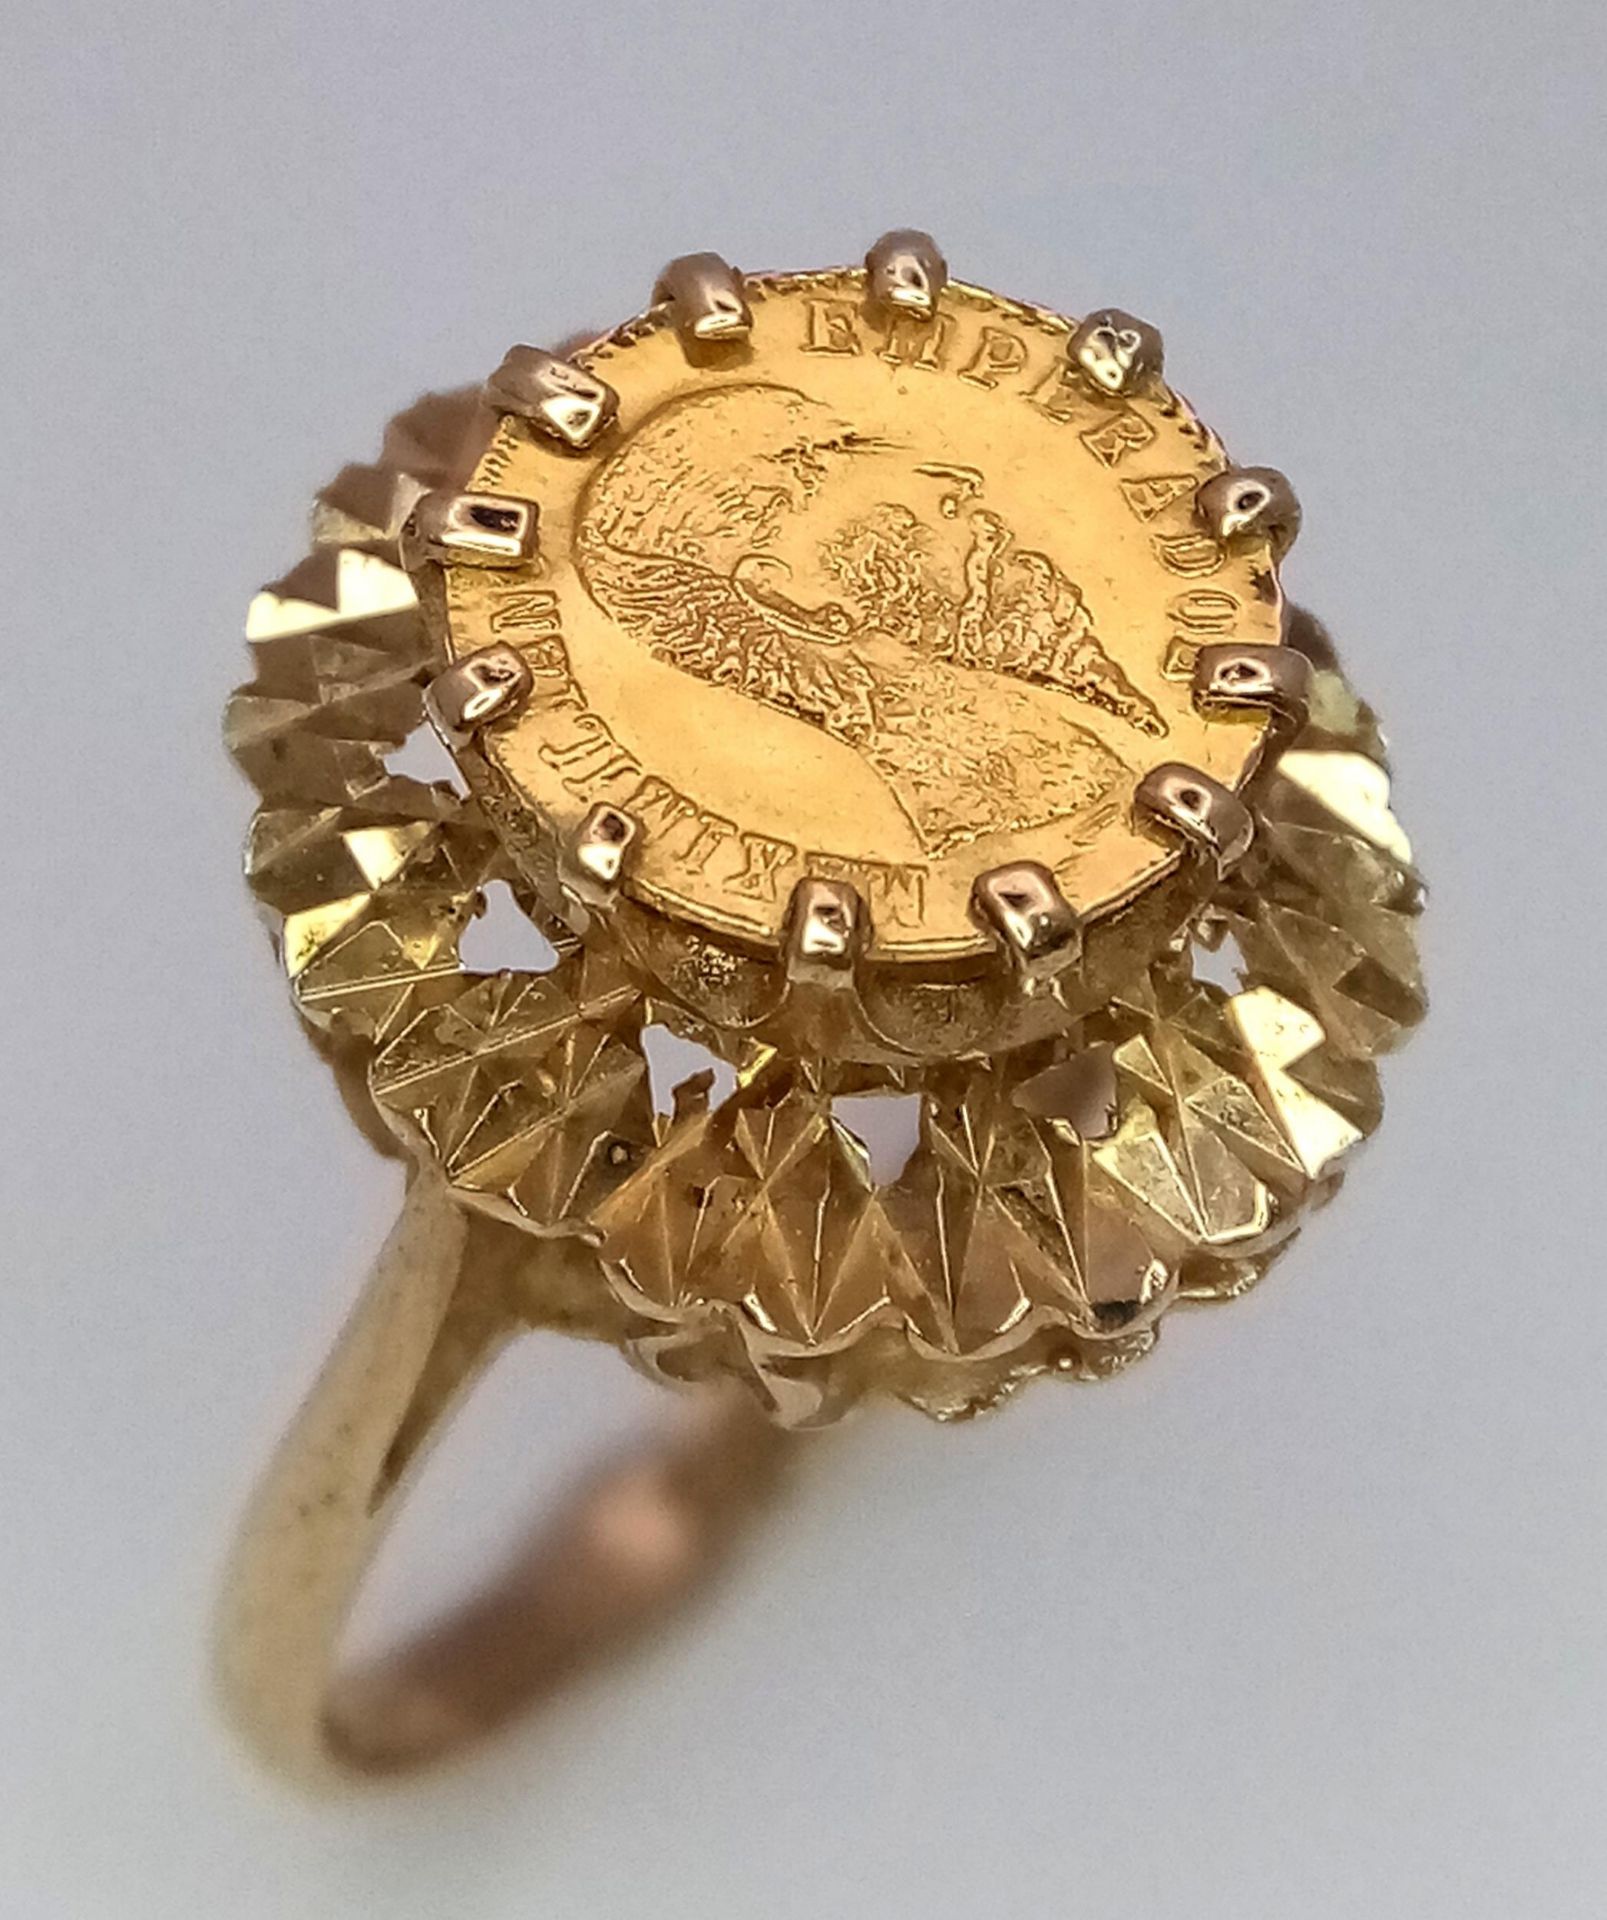 A 9 Carat Gold Tier Mounted Mexican/Columbian Gold Coin Set Ring Size P. Lower Crown Tier Measures - Image 3 of 5